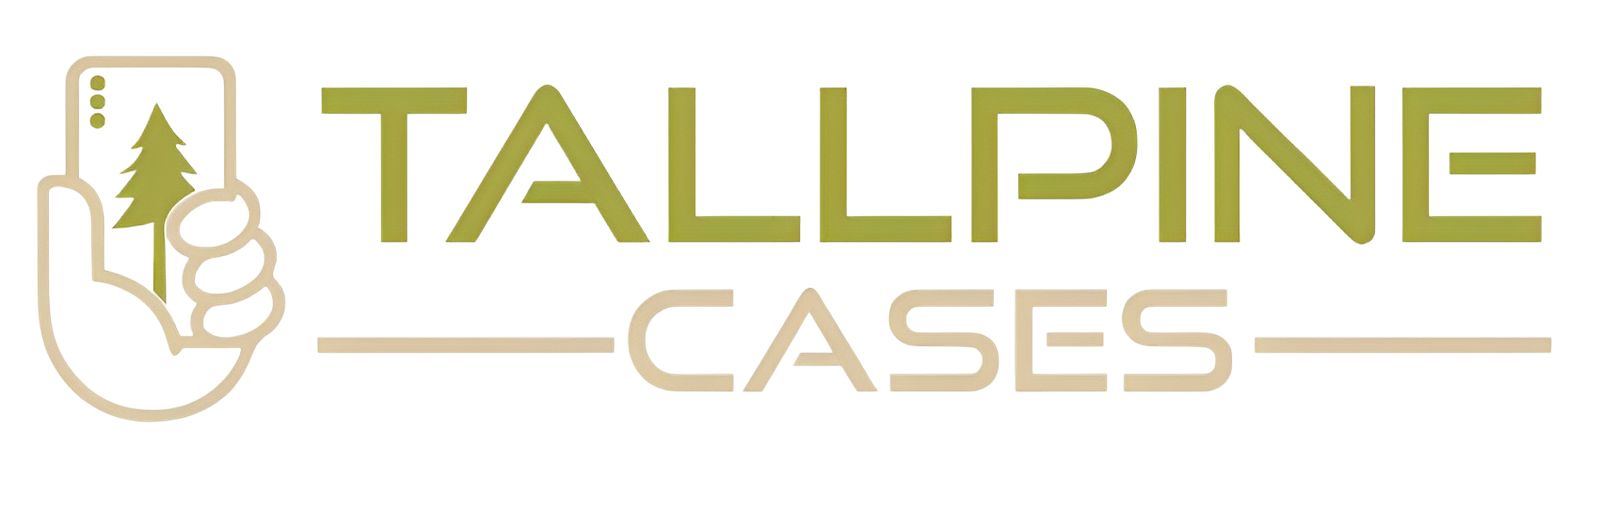 Save 10% Off Your Next Tallpine Cases Coupon Code